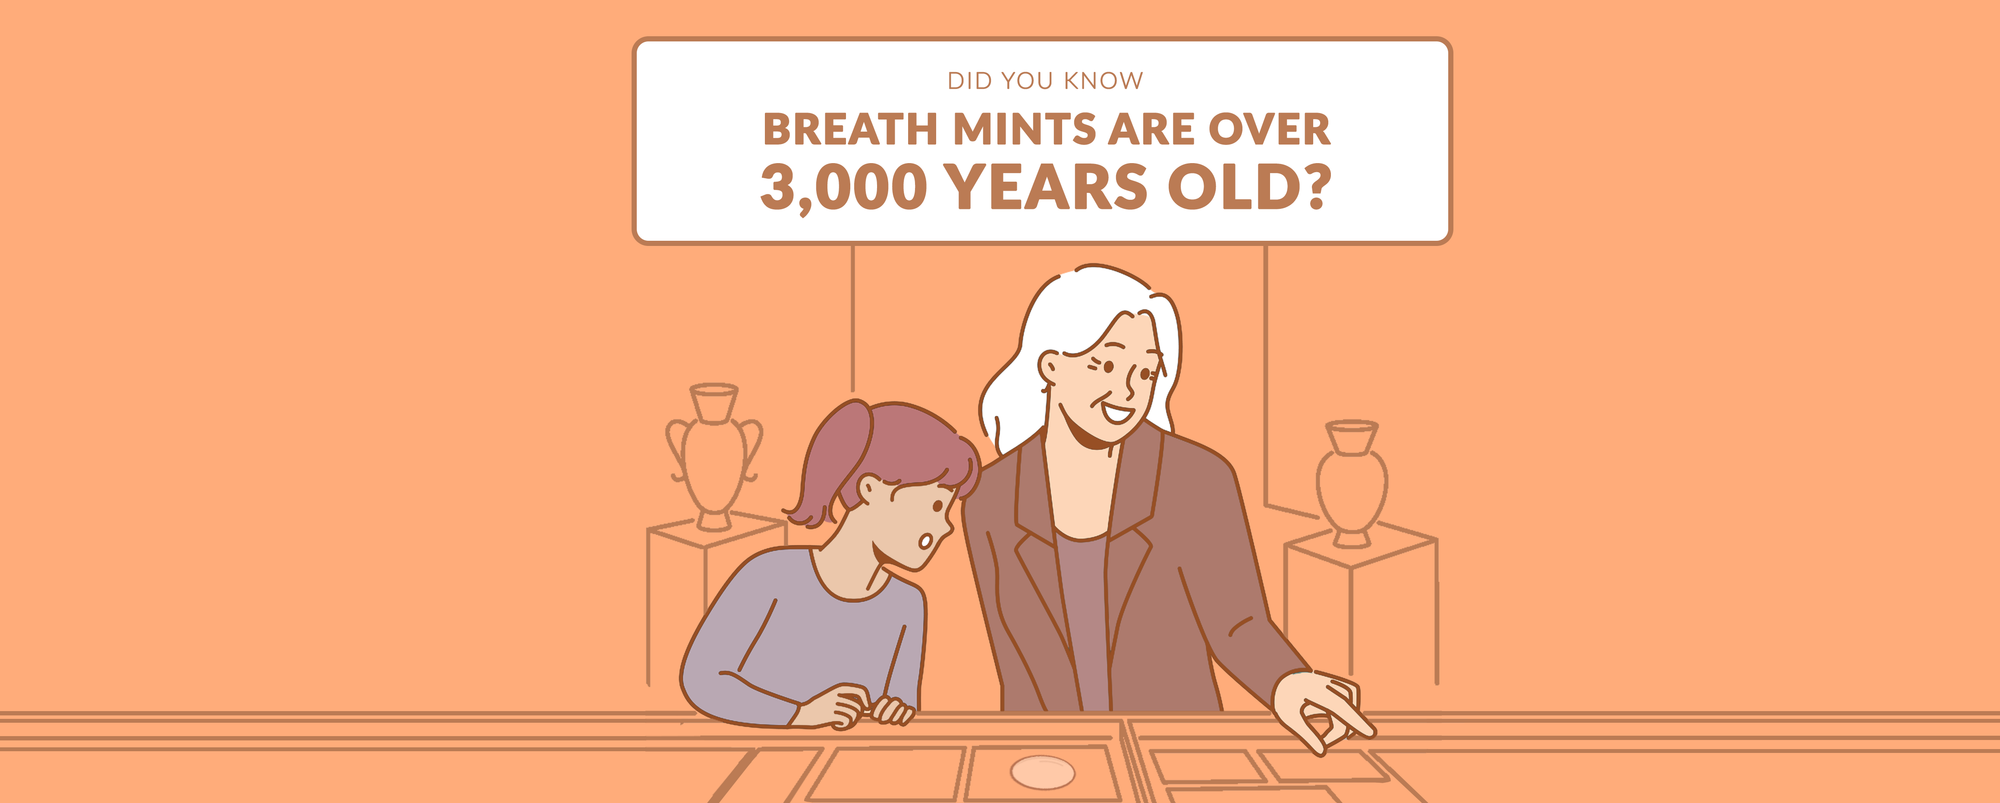 Breath Mints, An "Oral" History